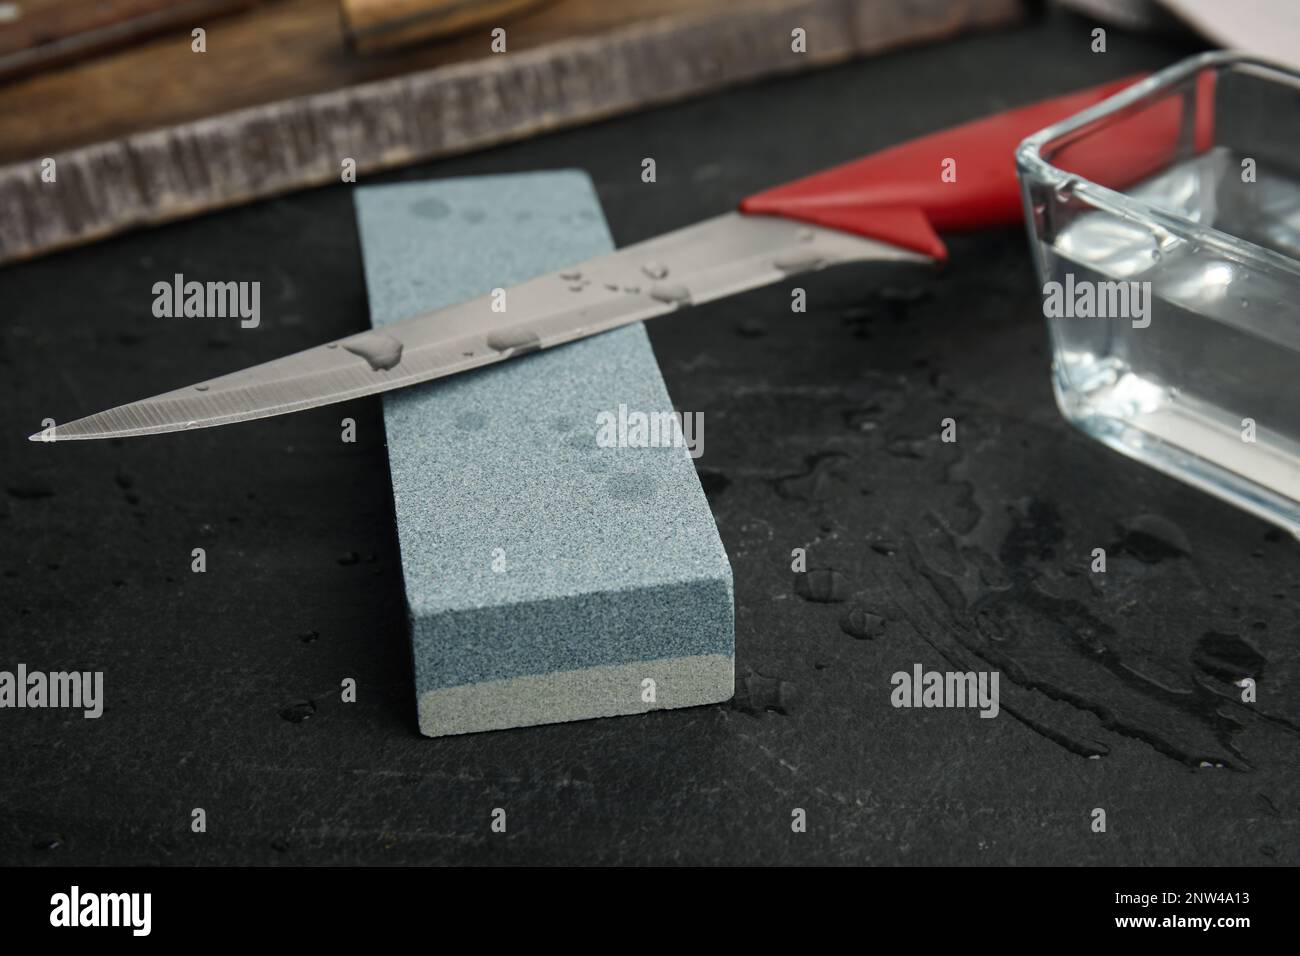 https://c8.alamy.com/comp/2NW4A13/sharpening-stone-knife-and-water-on-black-table-closeup-2NW4A13.jpg